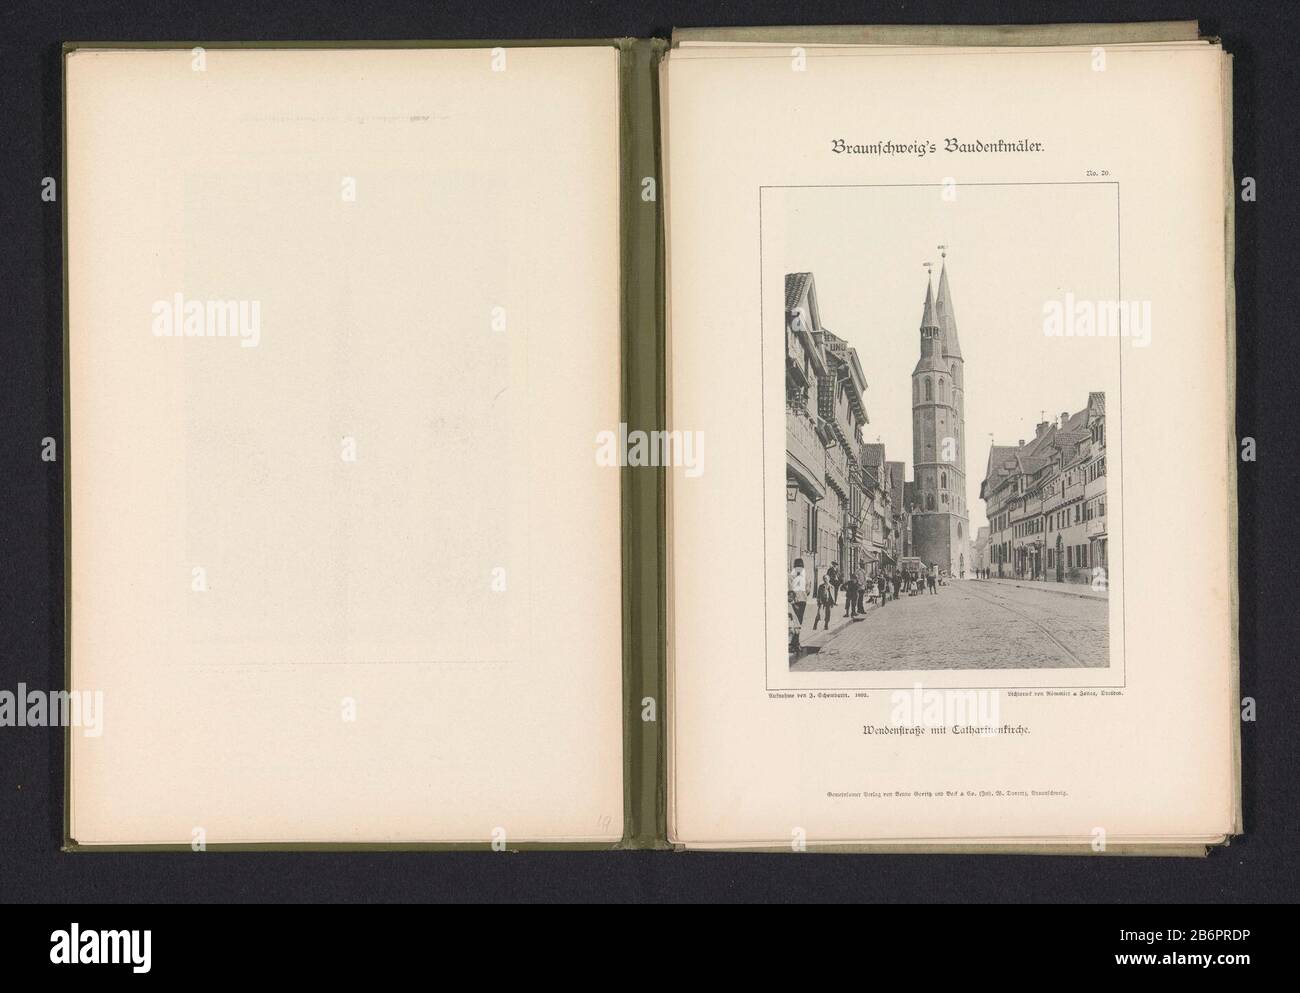 View Of The Wenden Boulevard And Saint Catherine Church In Braunschweig Wenden Strasse Mit Catharine Church Title Object Braunschweig S Baudenkmaler Series Title Property Type Photomechanical Print Page Item Number Rp F 01 7 796a Inscriptions